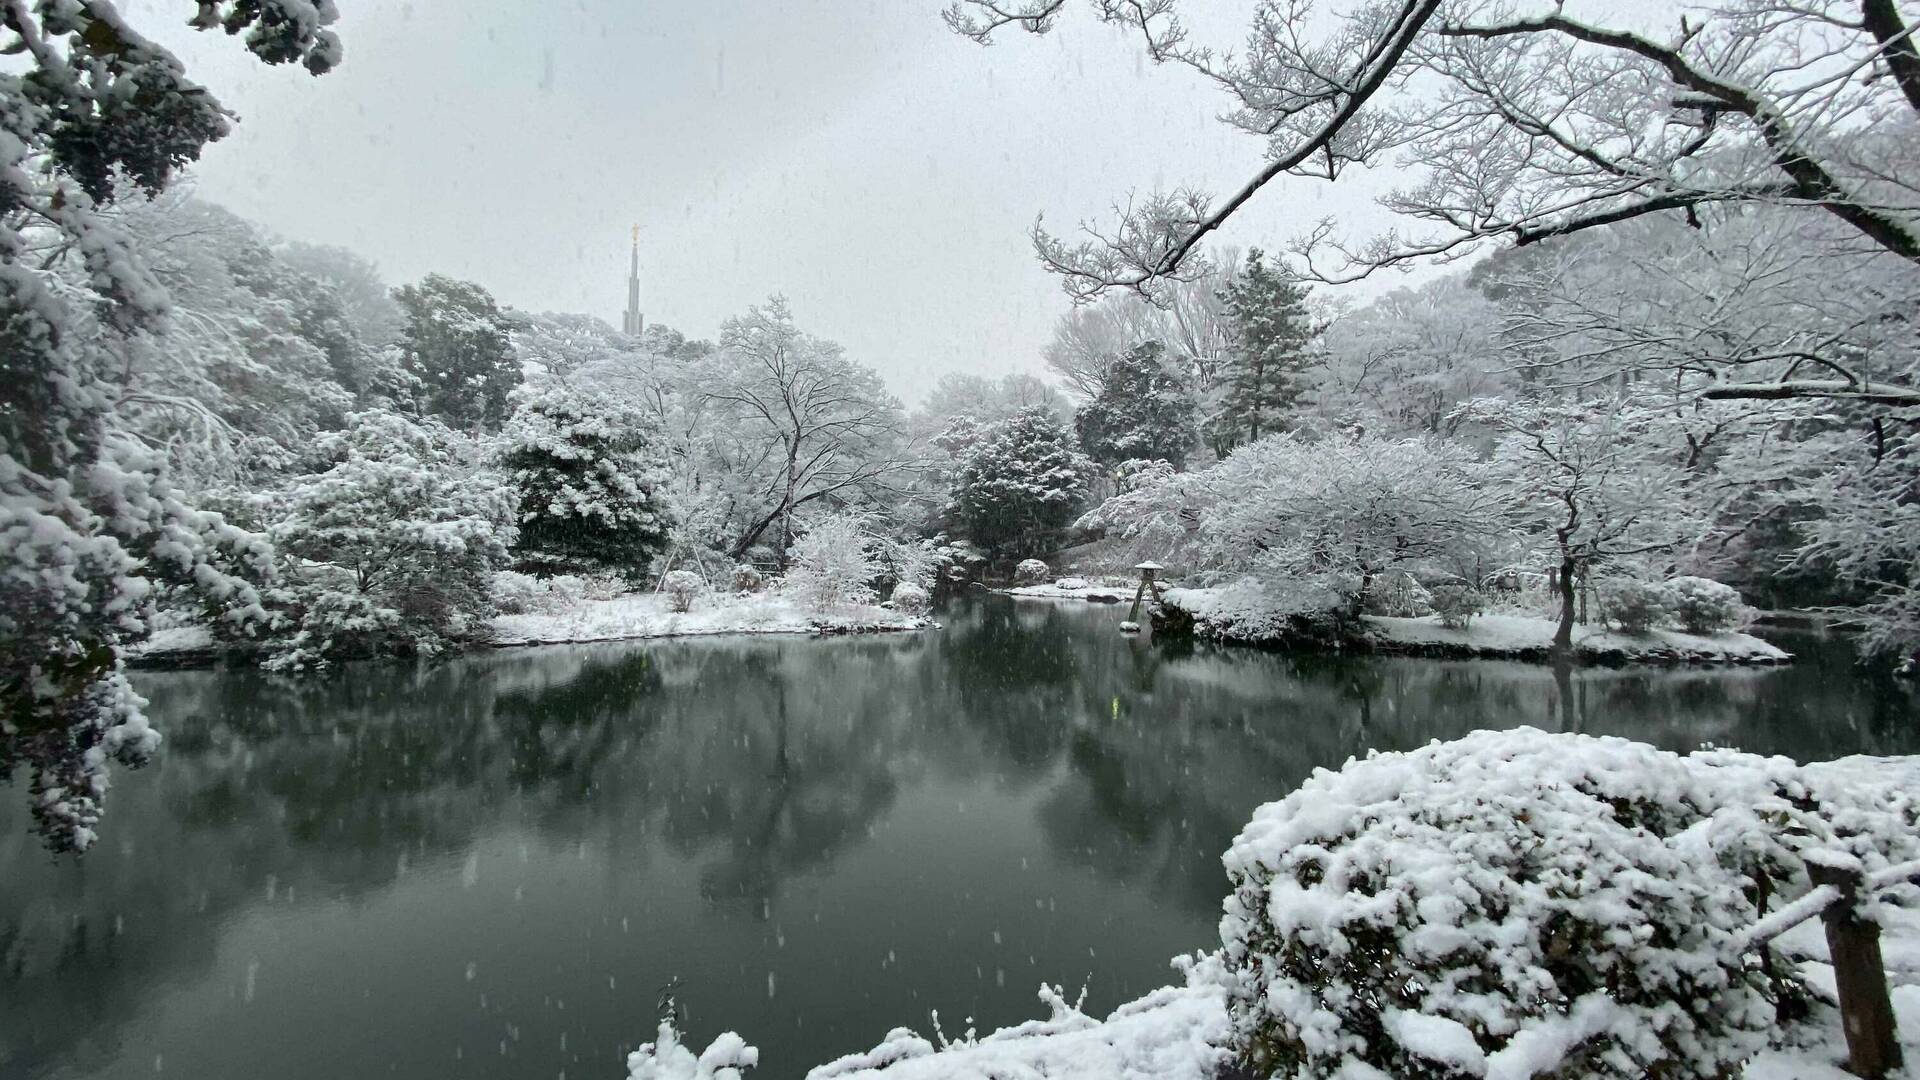 Tokyo might get its first snowfall of 2023 on Tuesday January 24